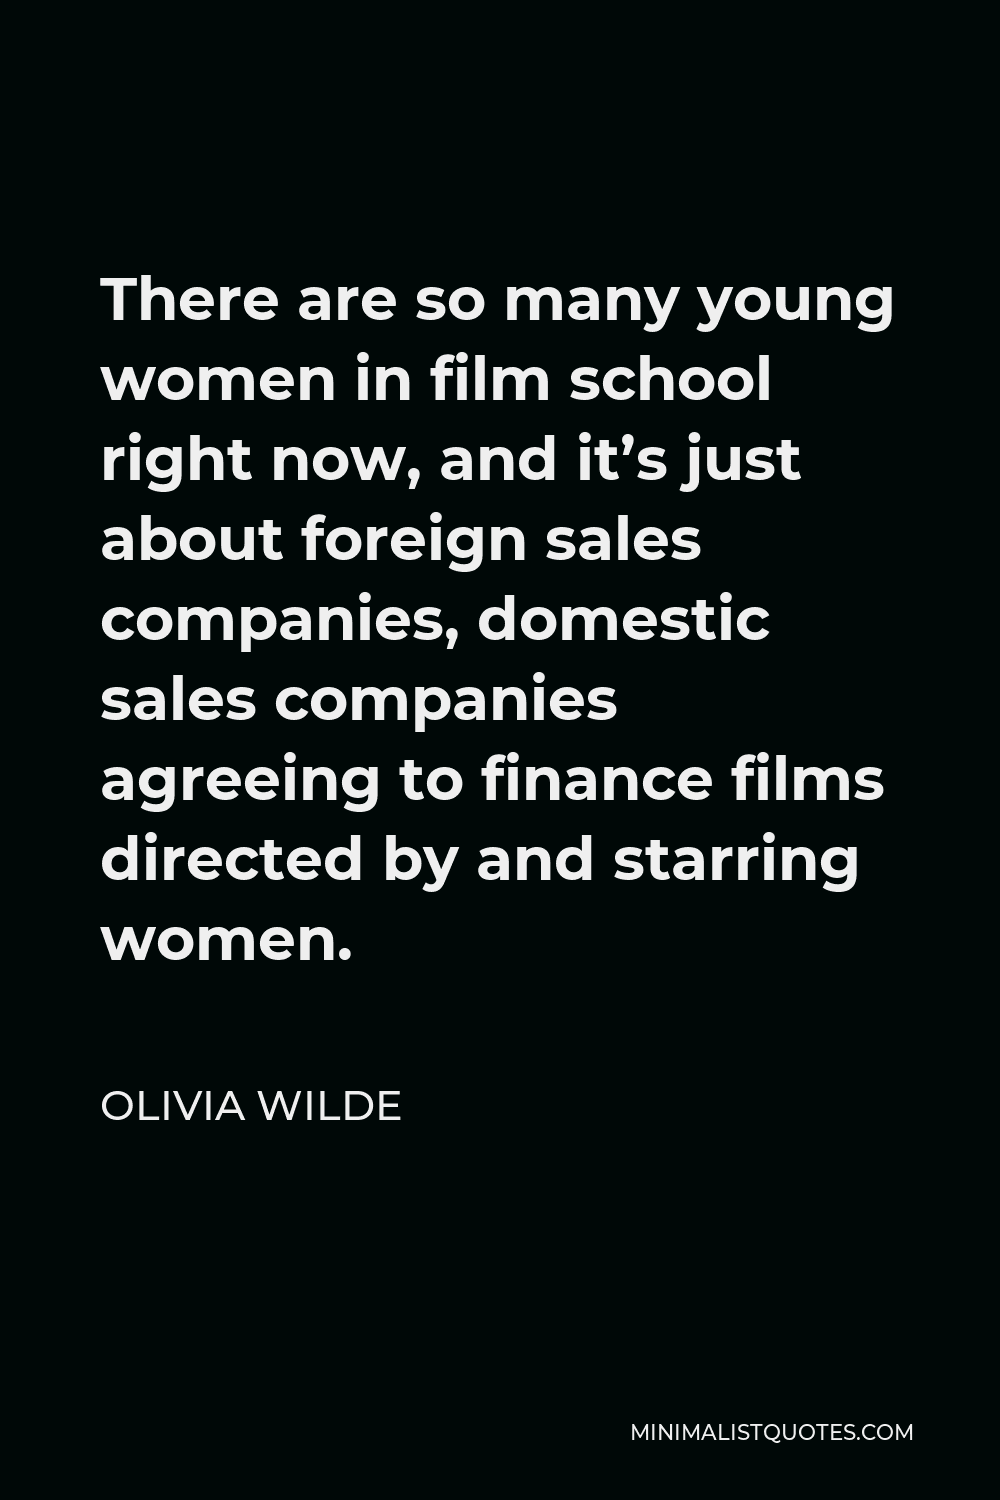 Olivia Wilde Quote - There are so many young women in film school right now, and it’s just about foreign sales companies, domestic sales companies agreeing to finance films directed by and starring women.